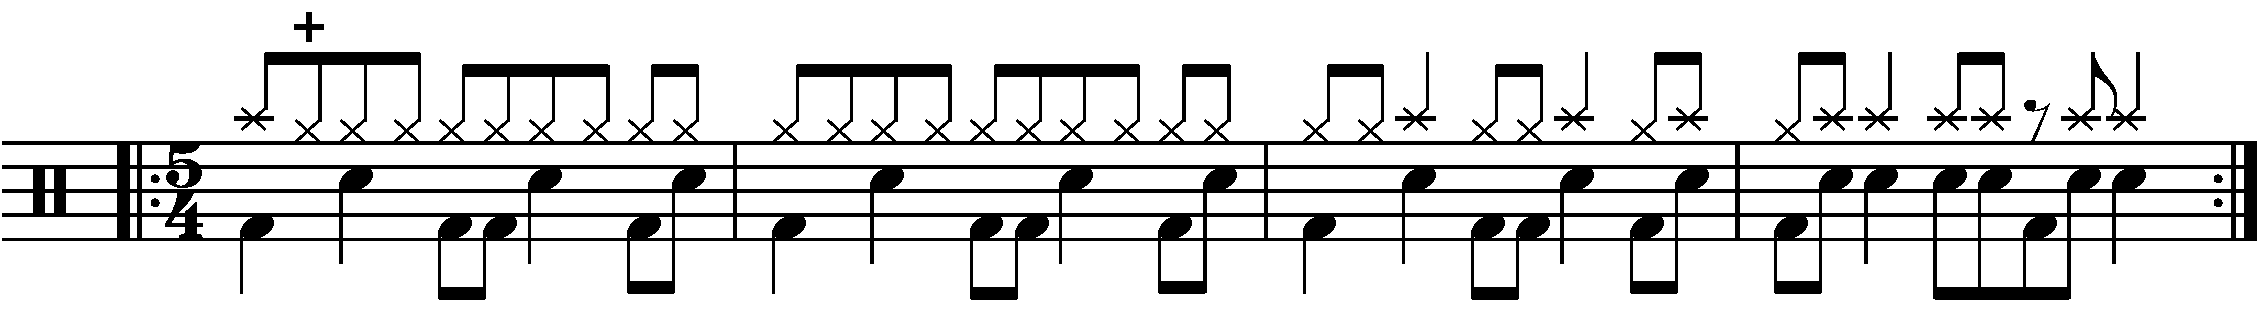 A four bar phrase where two bar fills are used.